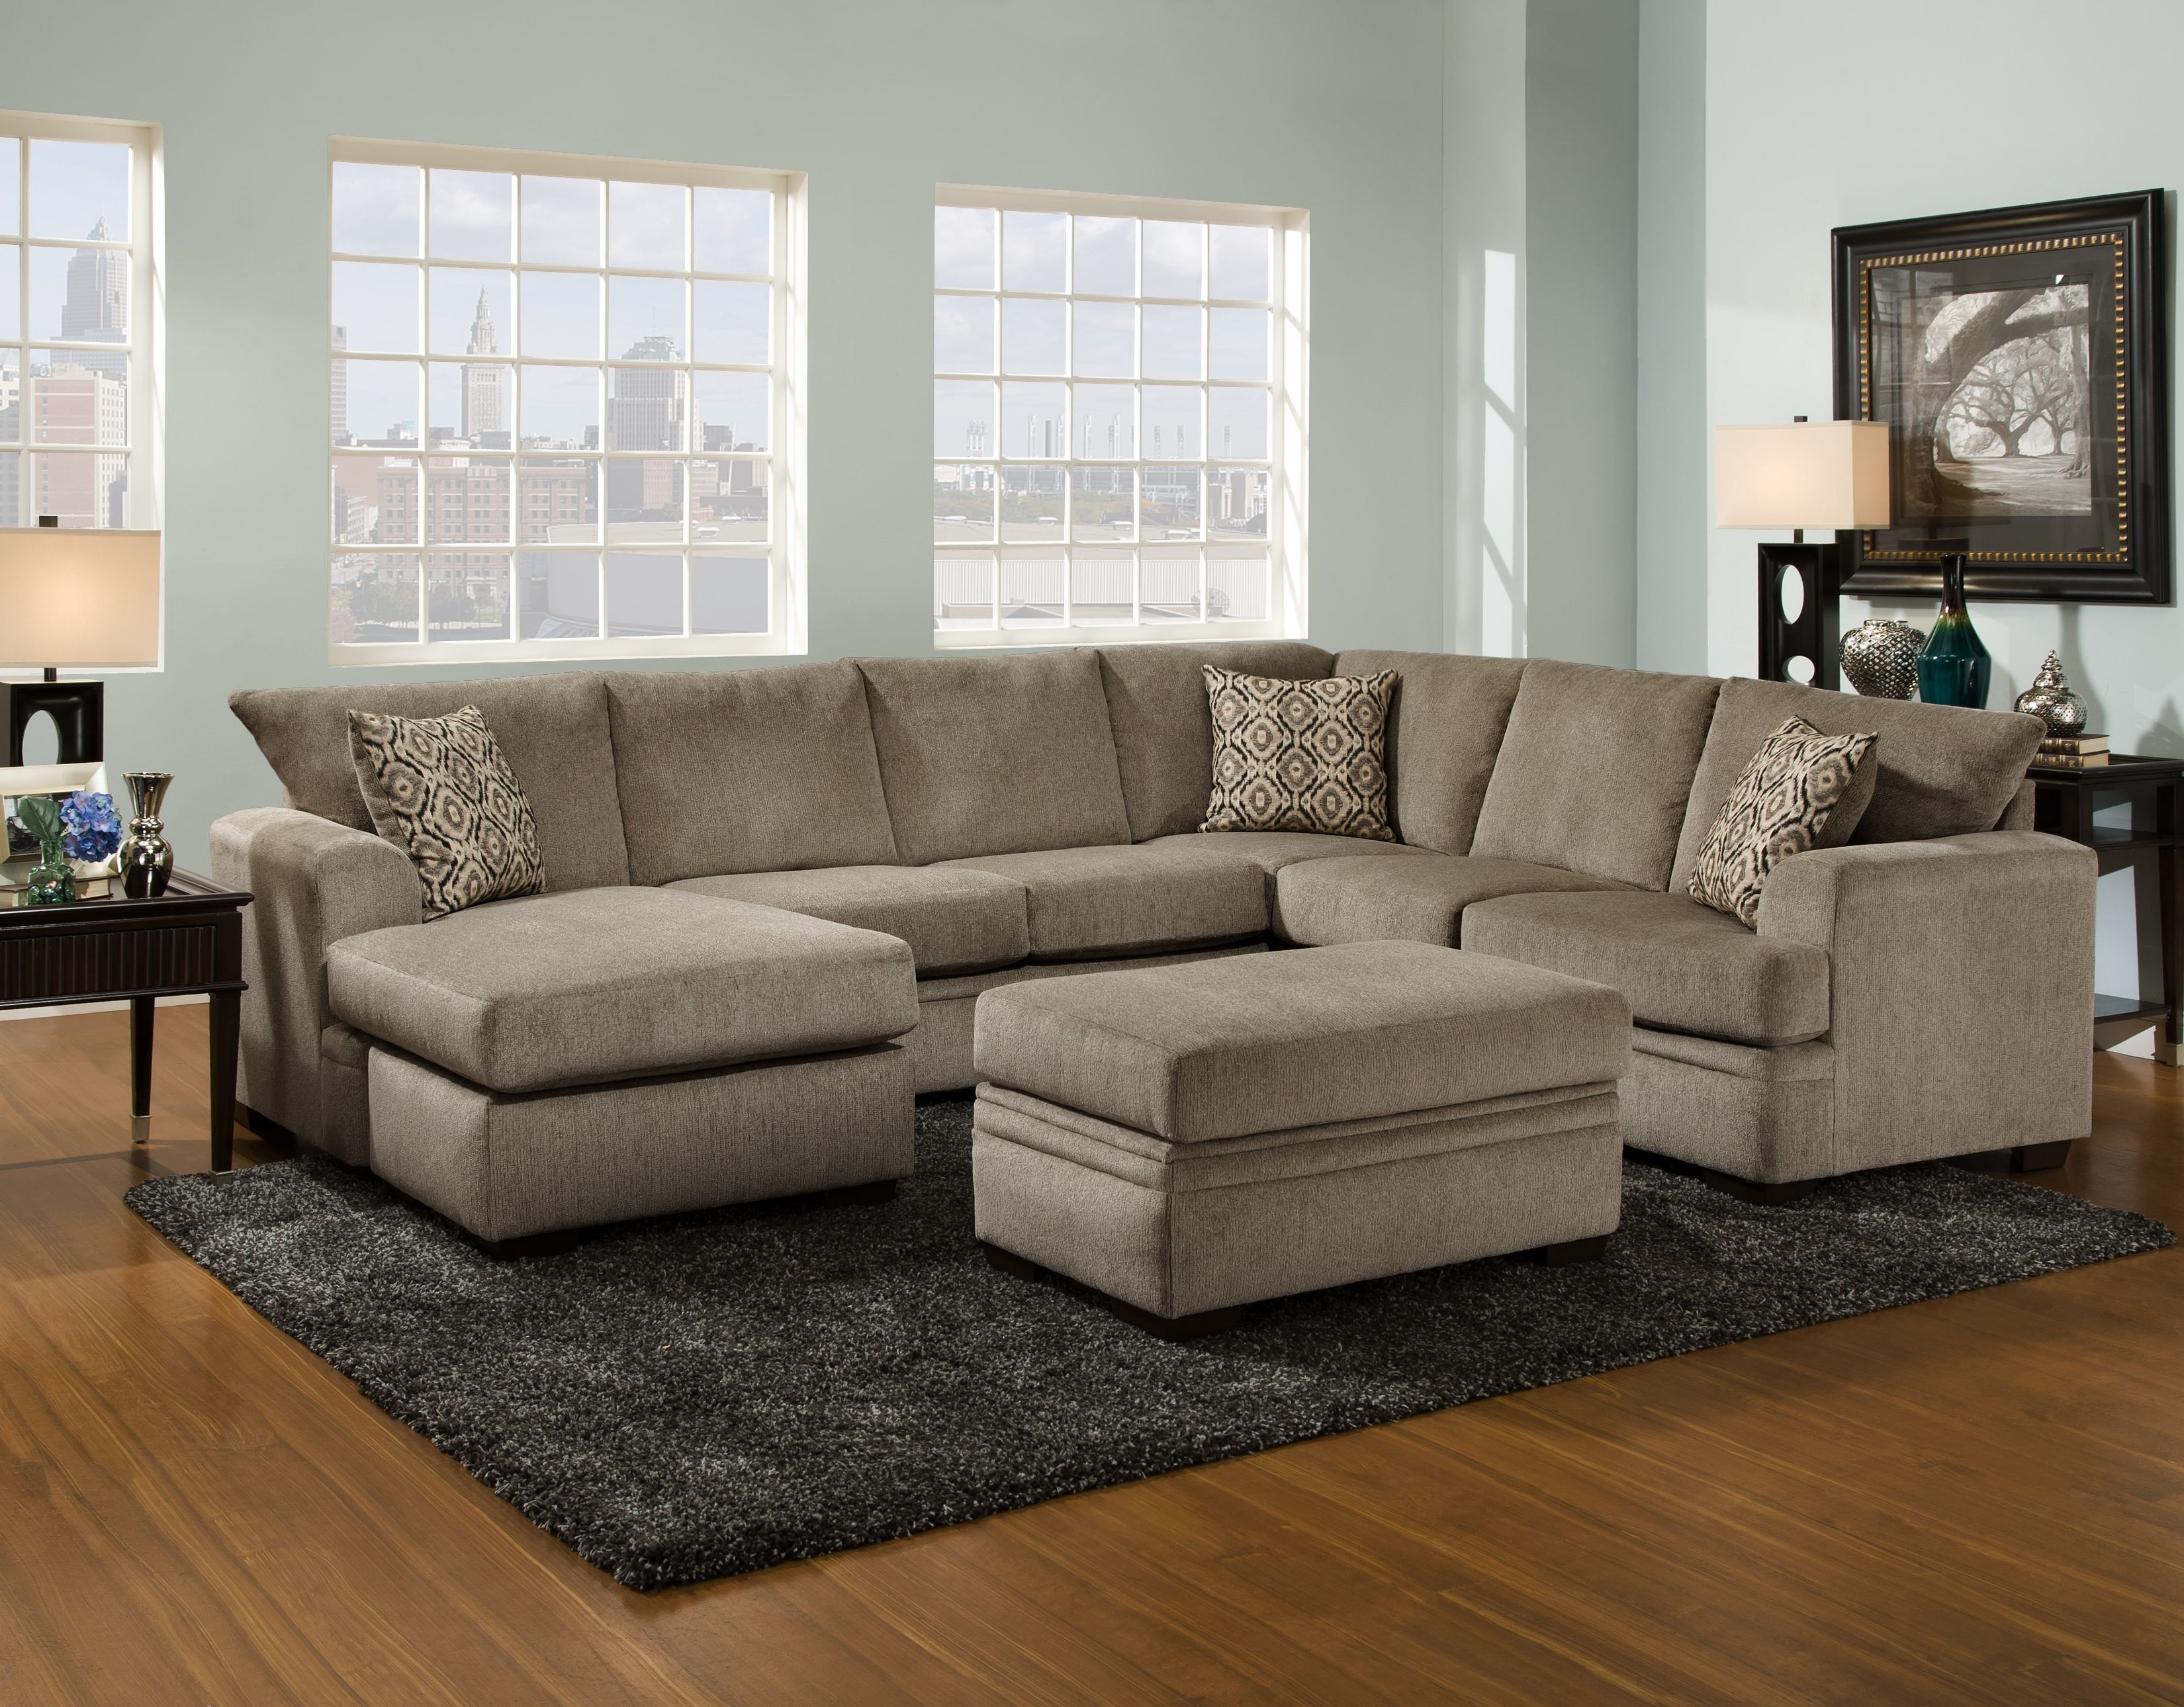 Living Room – Crazy Joe's Best Deal Furniture With Well Known Janesville Wi Sectional Sofas (View 1 of 20)